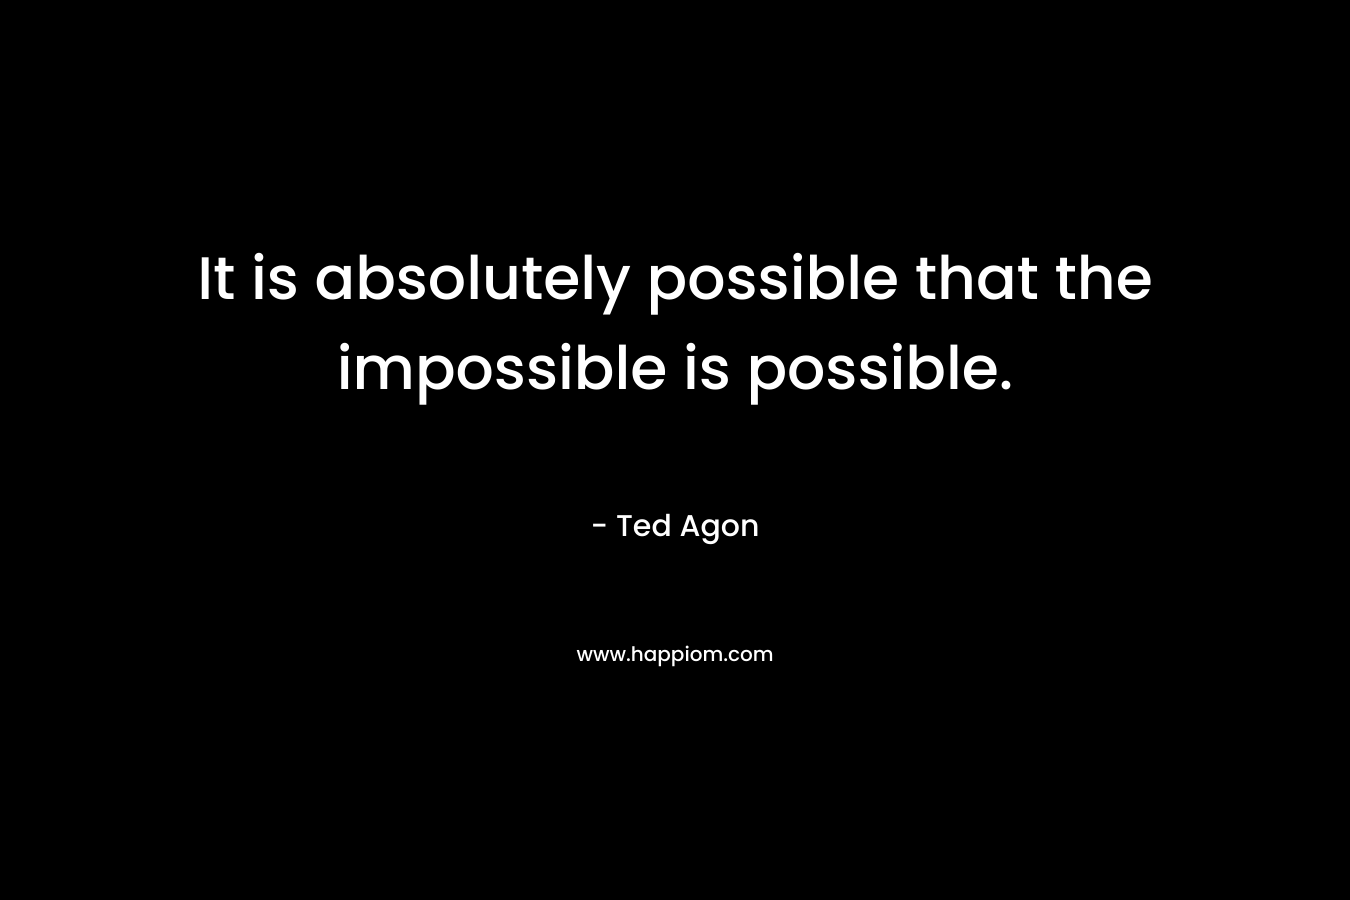 It is absolutely possible that the impossible is possible.